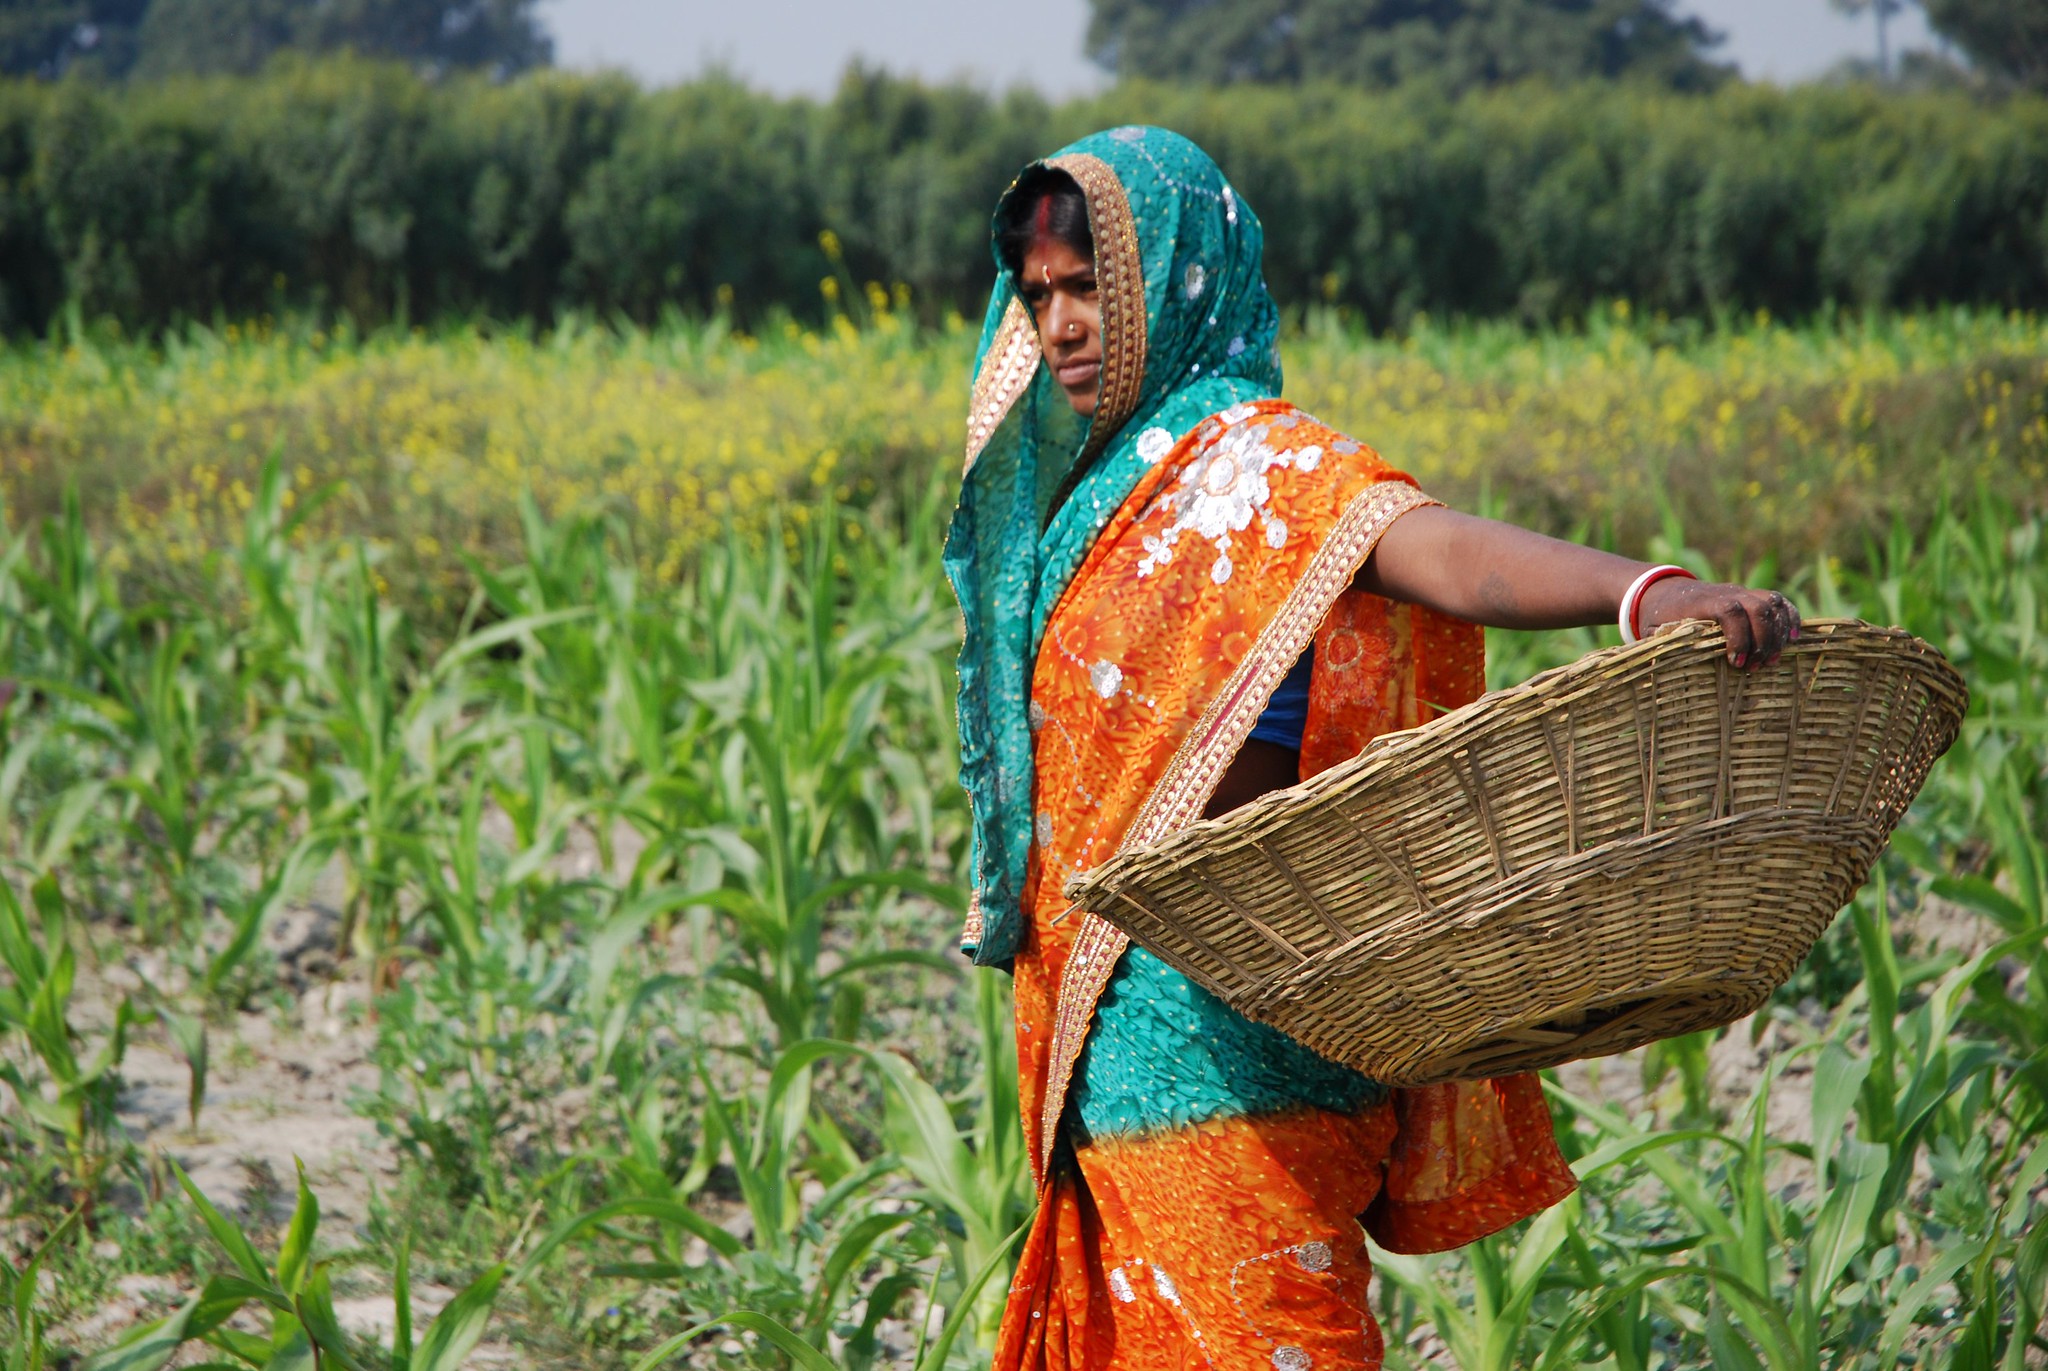 A farmer weeds a maize field in Pusa, Bihar state, India. (Photo: M. DeFreese/CIMMYT)